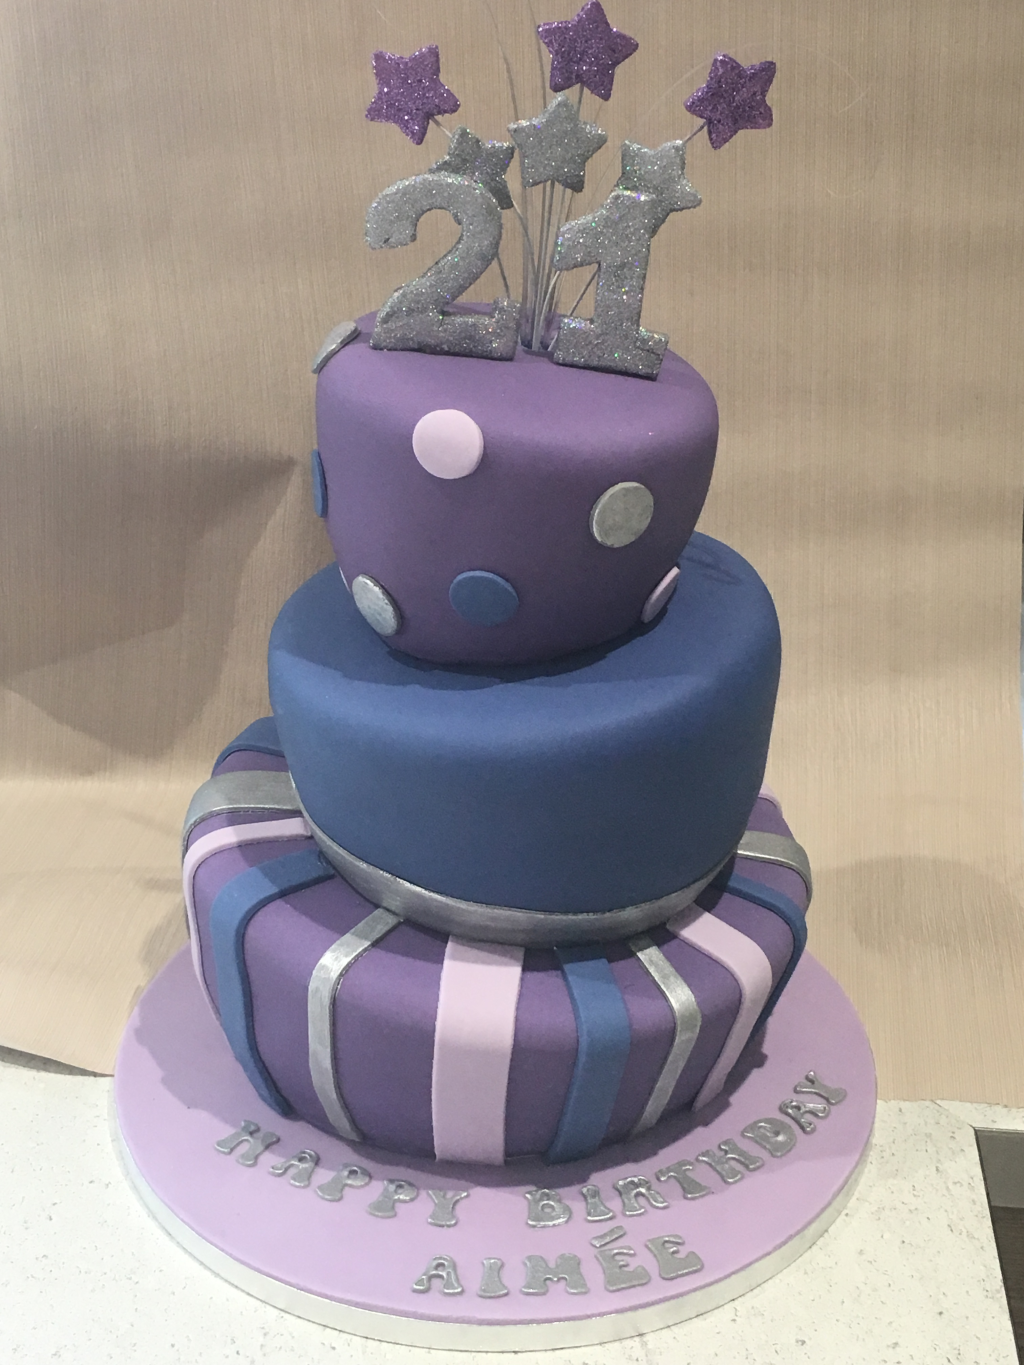 Topsy-turvy-purple-and-silver-cake